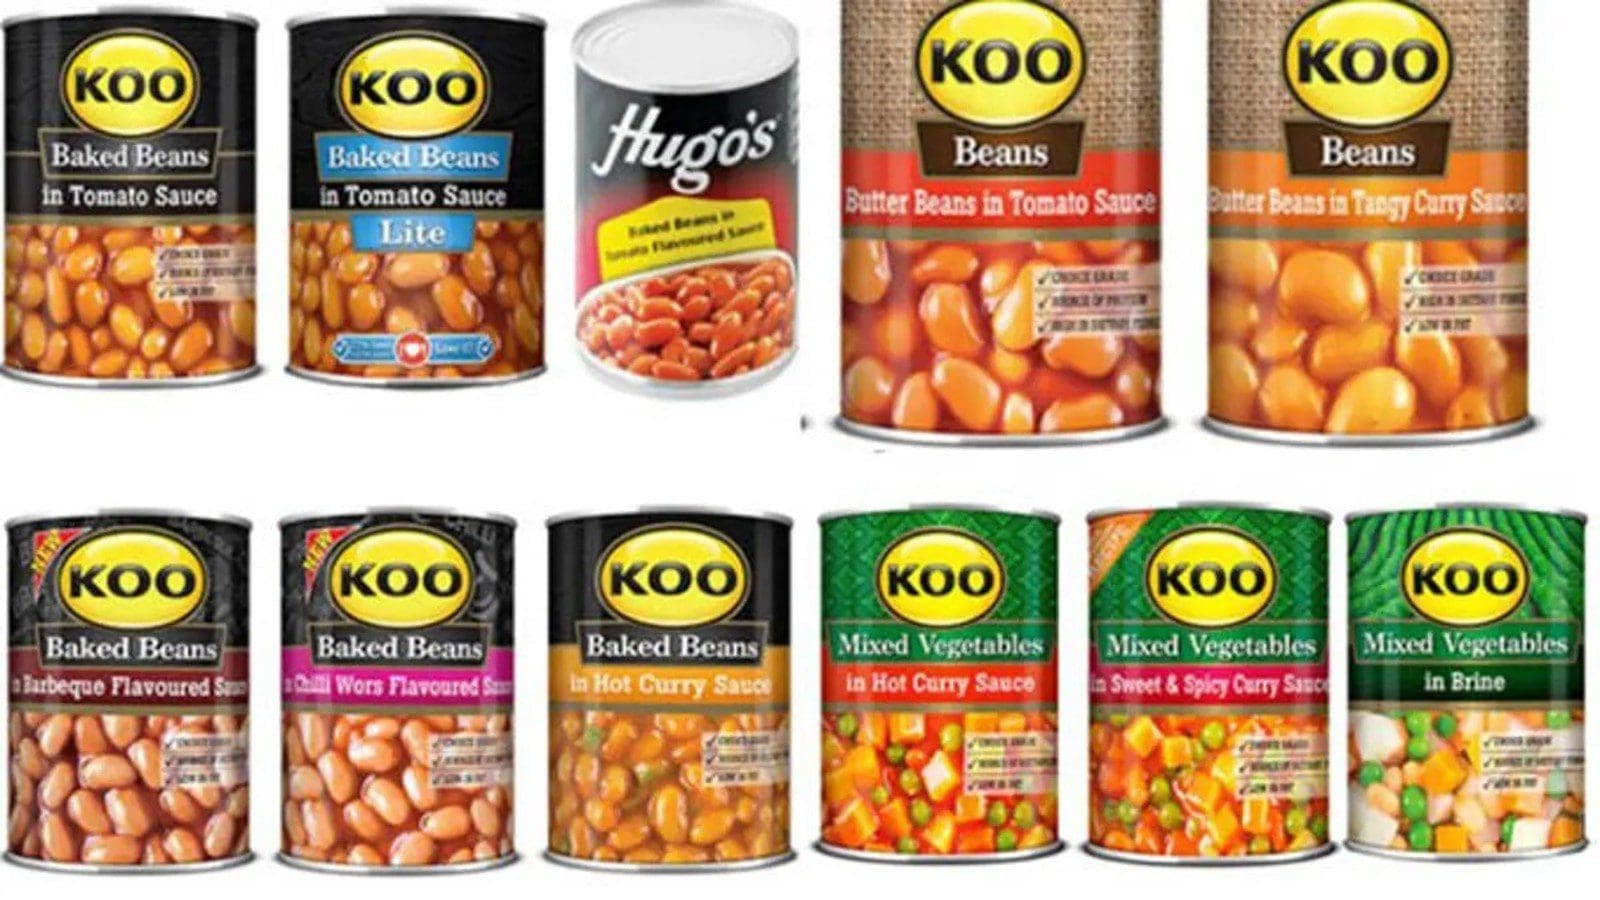 Tiger brands recalls canned products over faulty cans